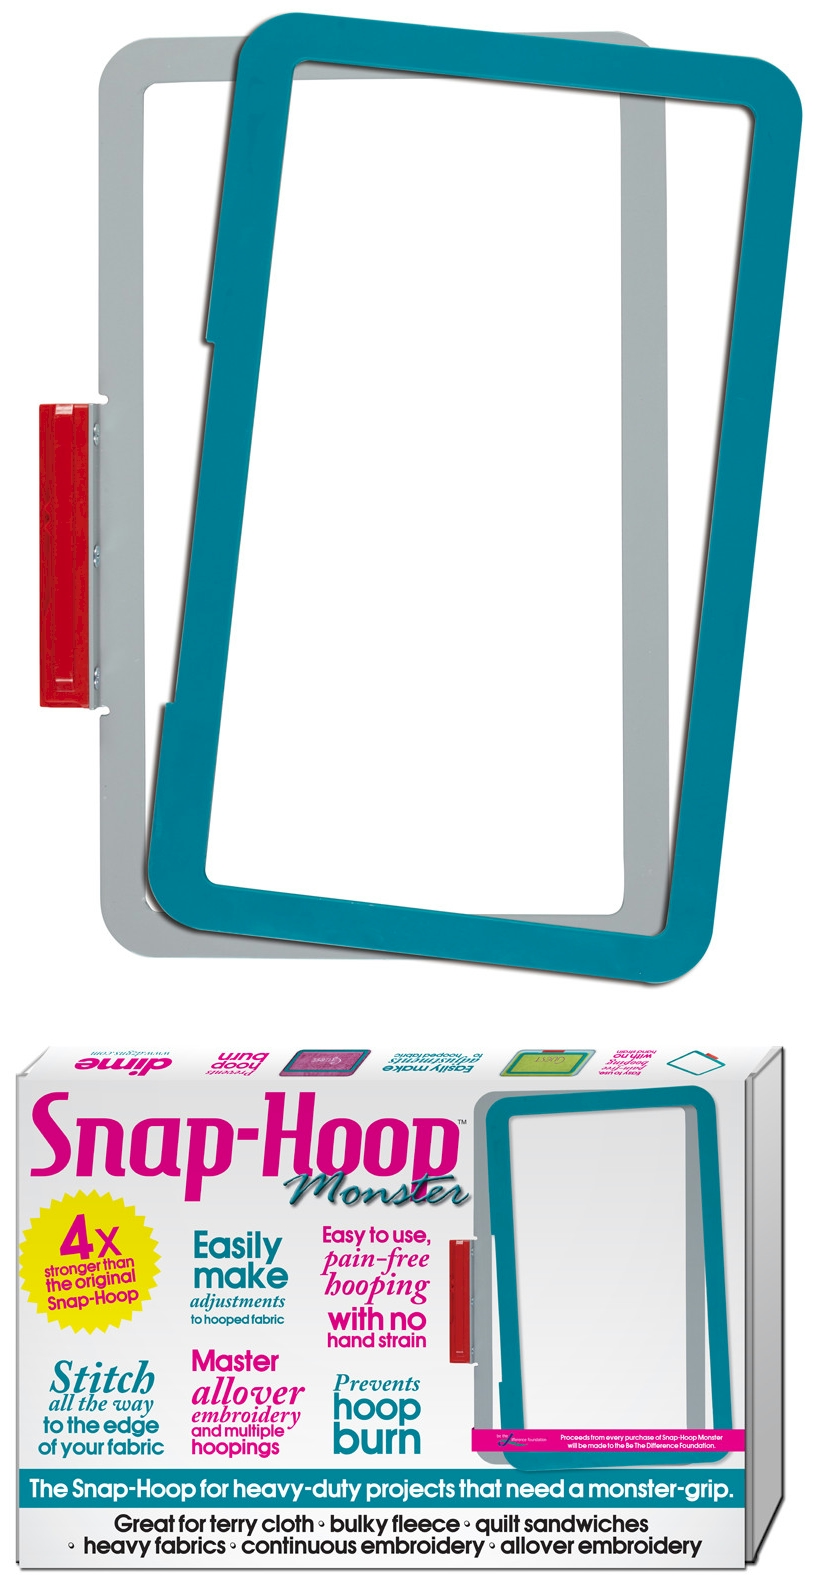 Snap-Hoop MONSTER A Version 5 - 7"x12" for Slide On BABY LOCK & BROTHER Embroidery Machines by Designs in Machine Embroidery